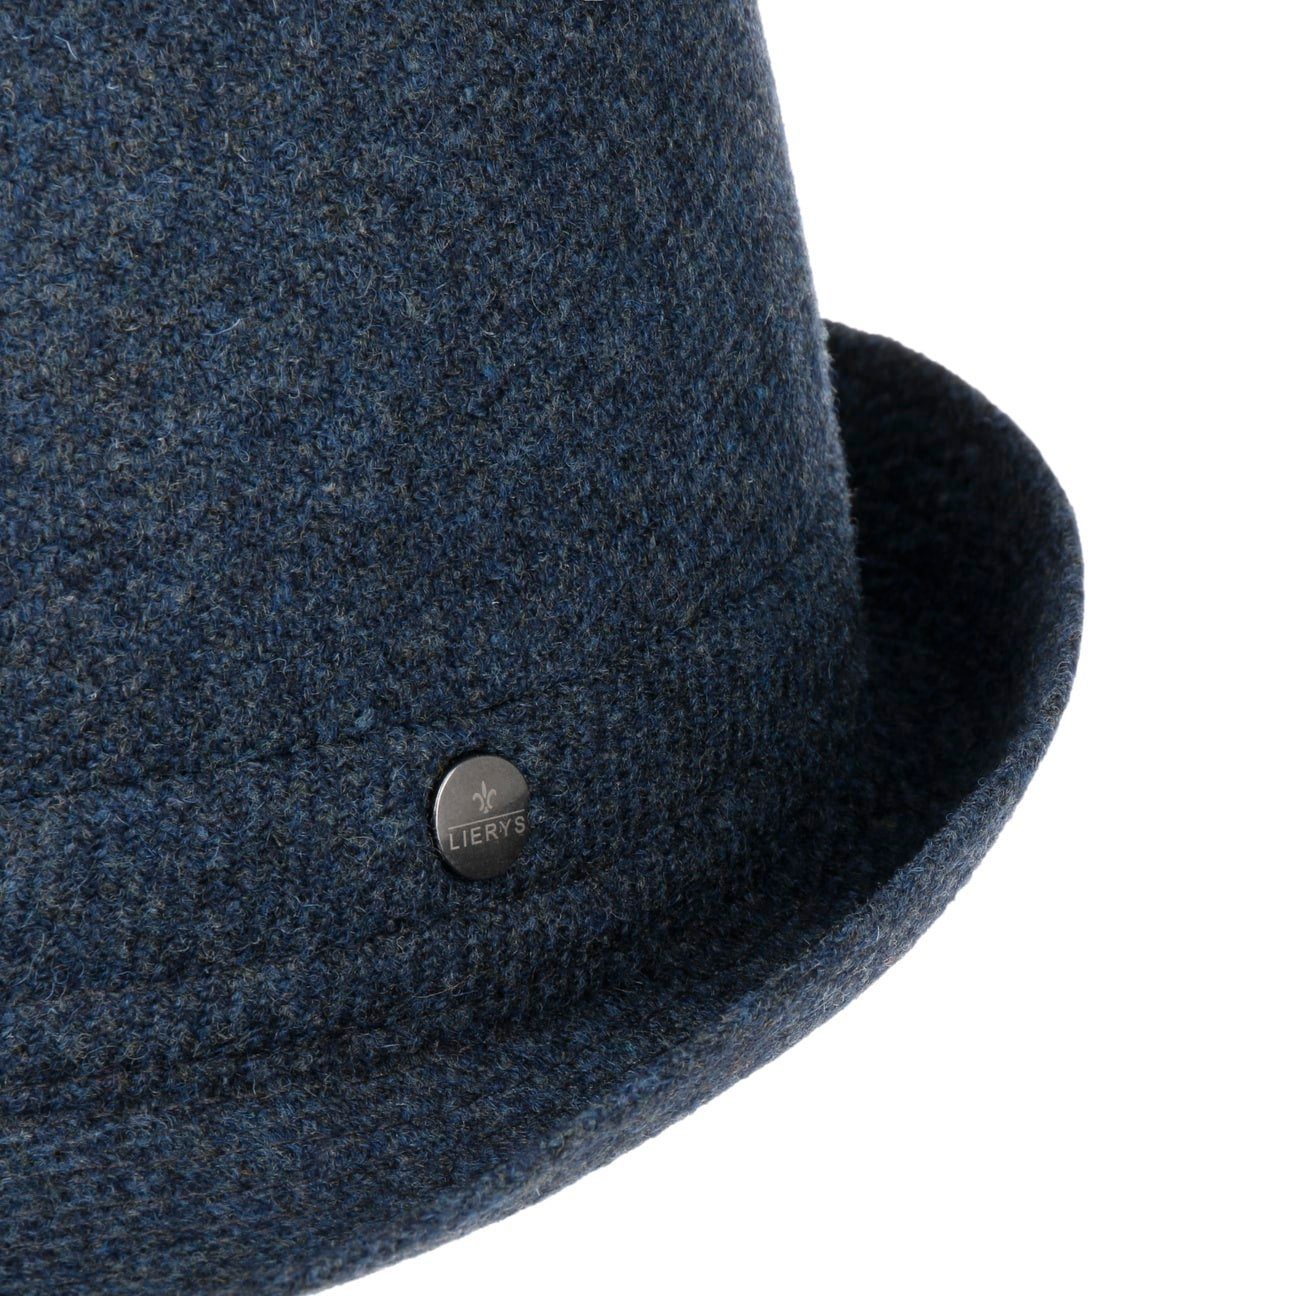 Futter, Wolltrilby Lierys mit in (1-St) blau Made Trilby Italy